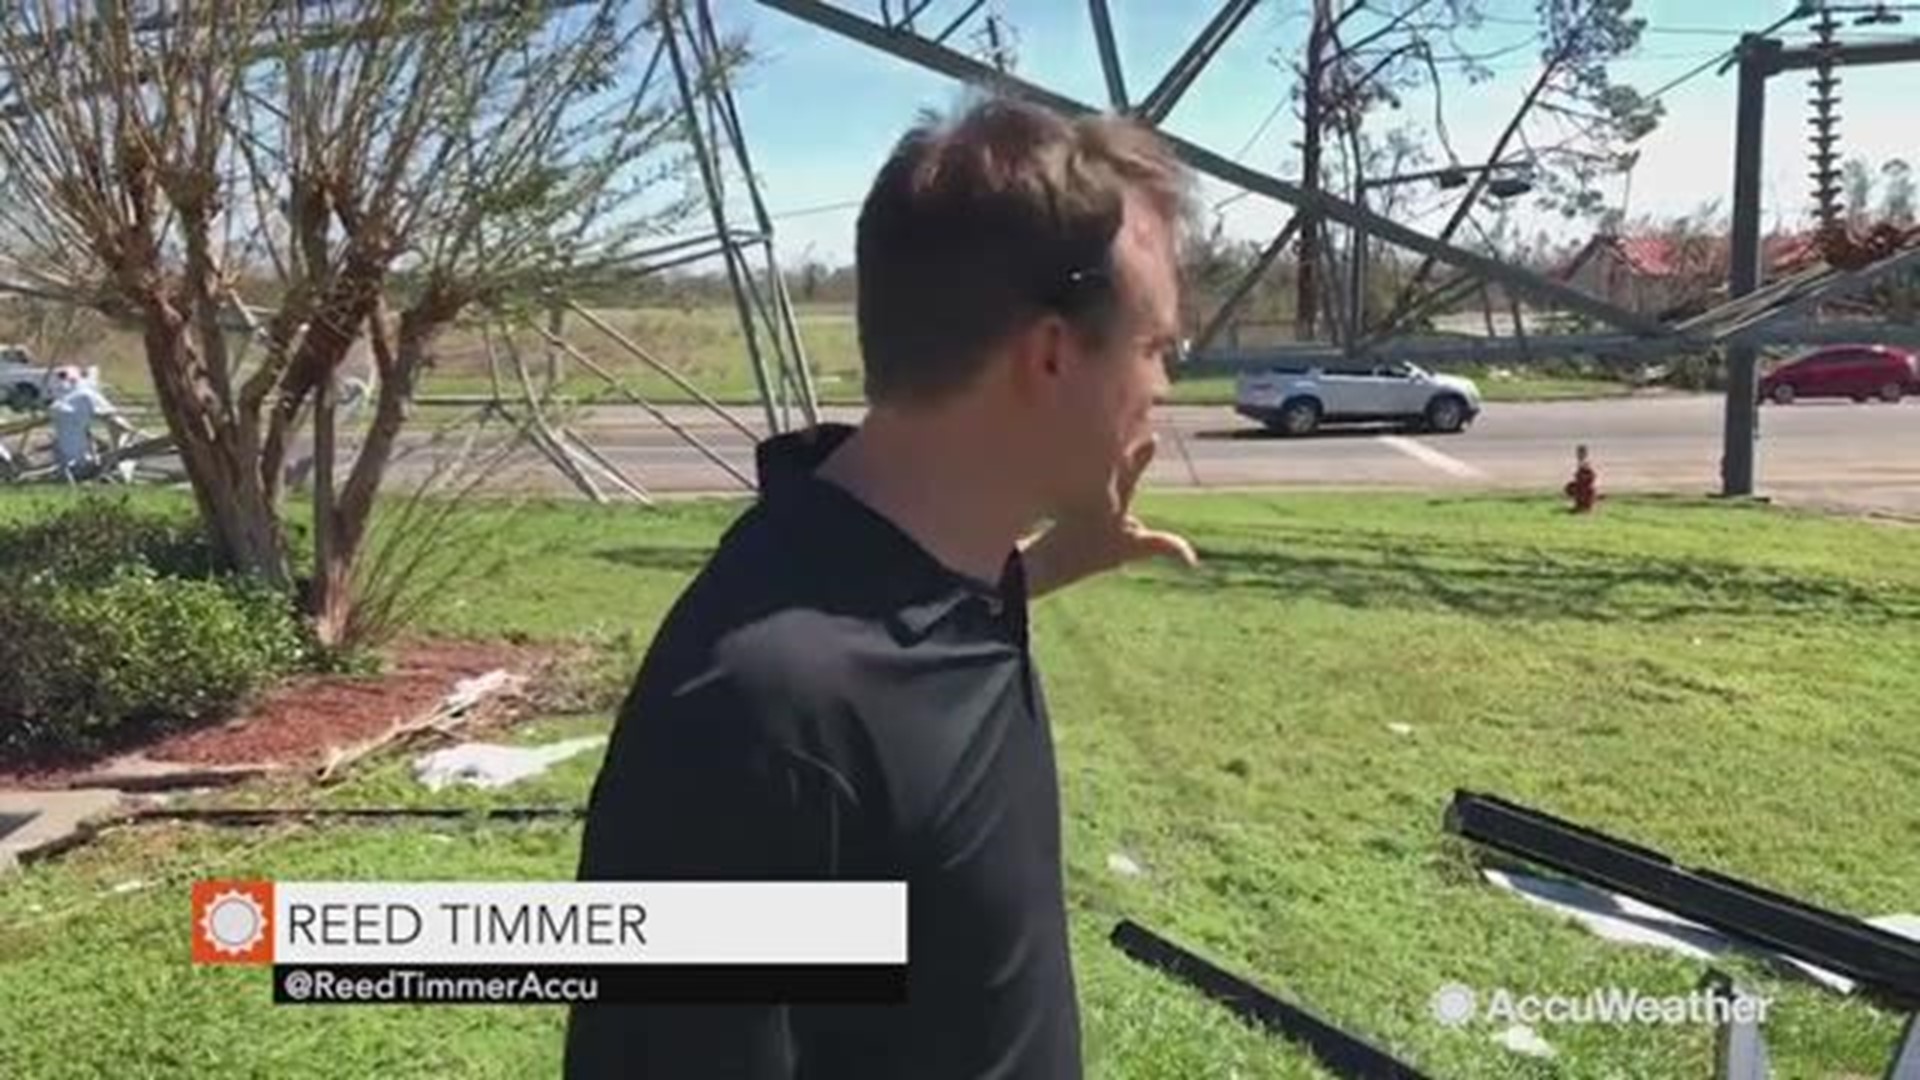 Ever wonder what kind of damage a category 4 hurricane can cause? This video taken in Callaway, Florida shows high tension power units knocked down as well as semis and cars turned over.